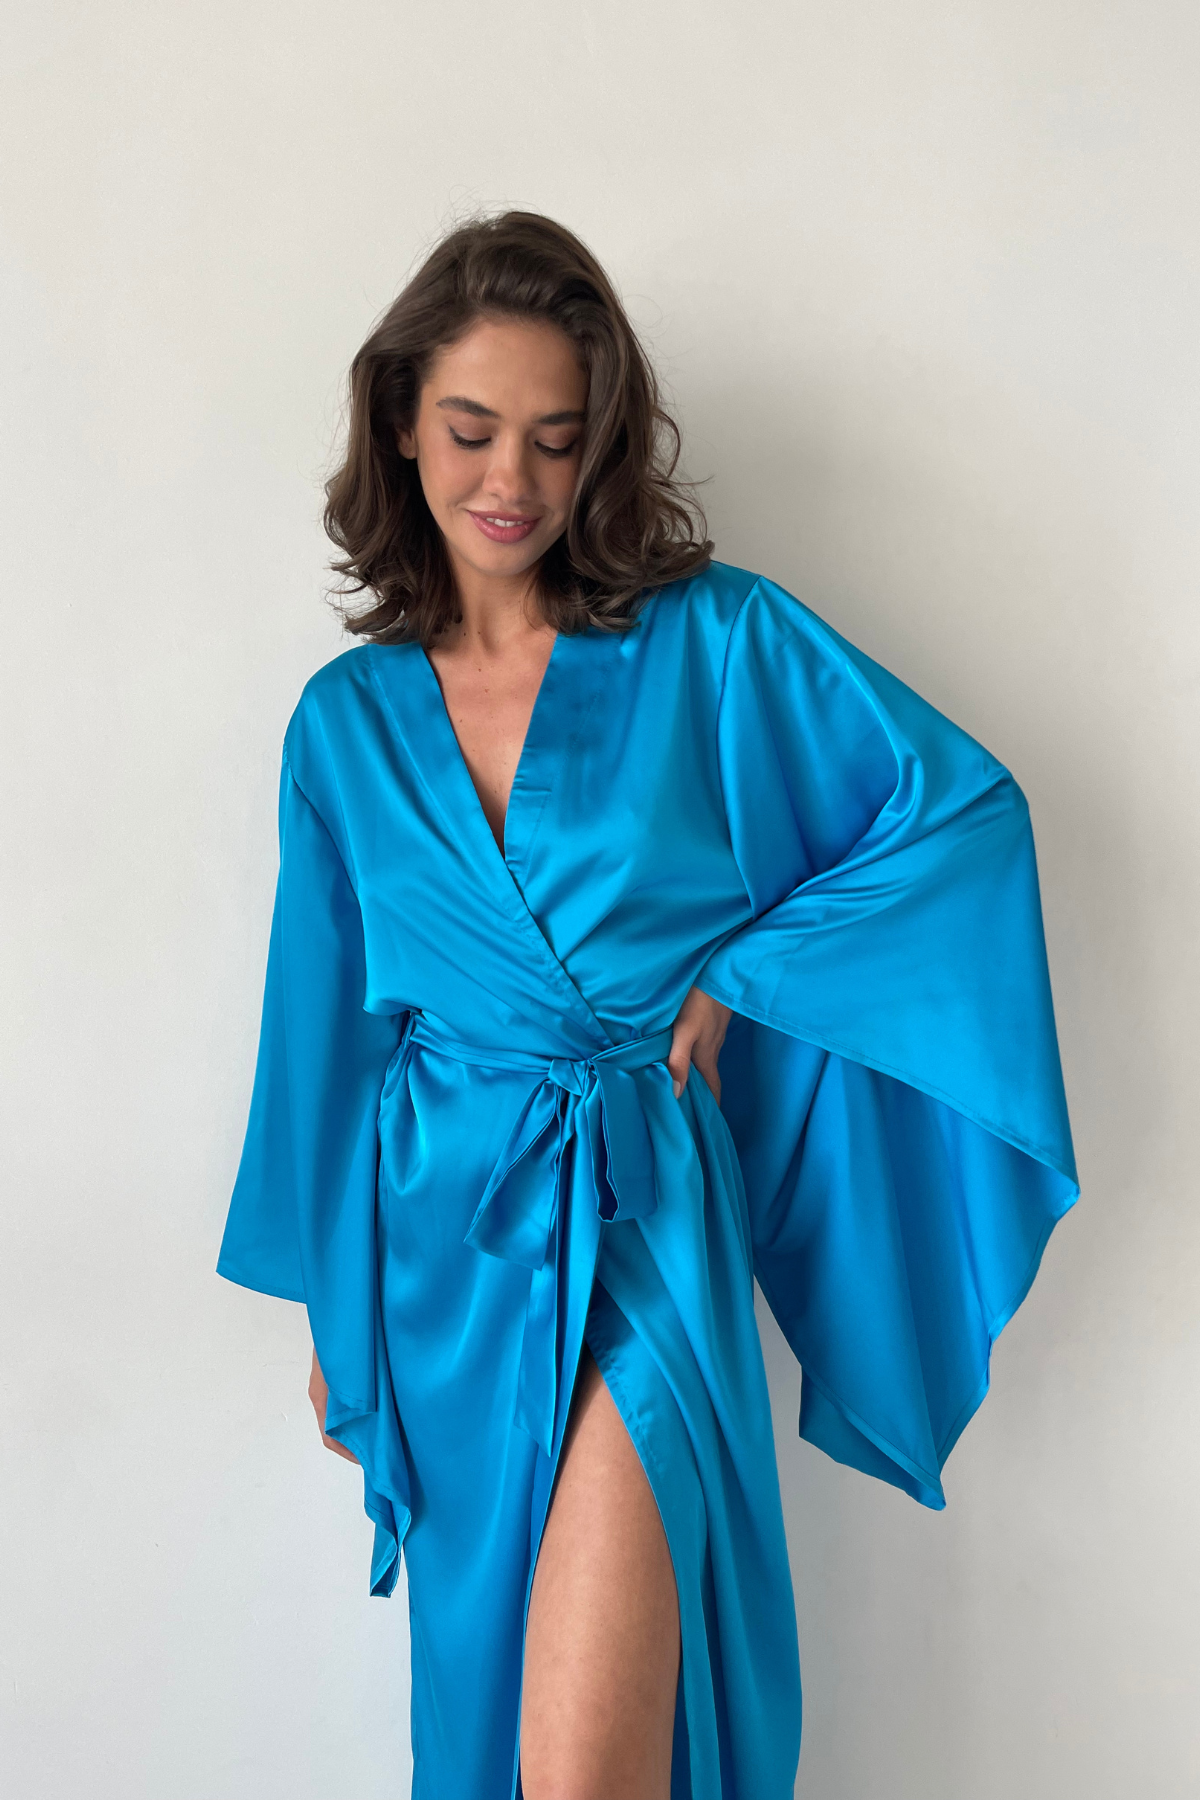 Kimono Neon Blue Long Robe made out of satin silk - Angie's Showroom